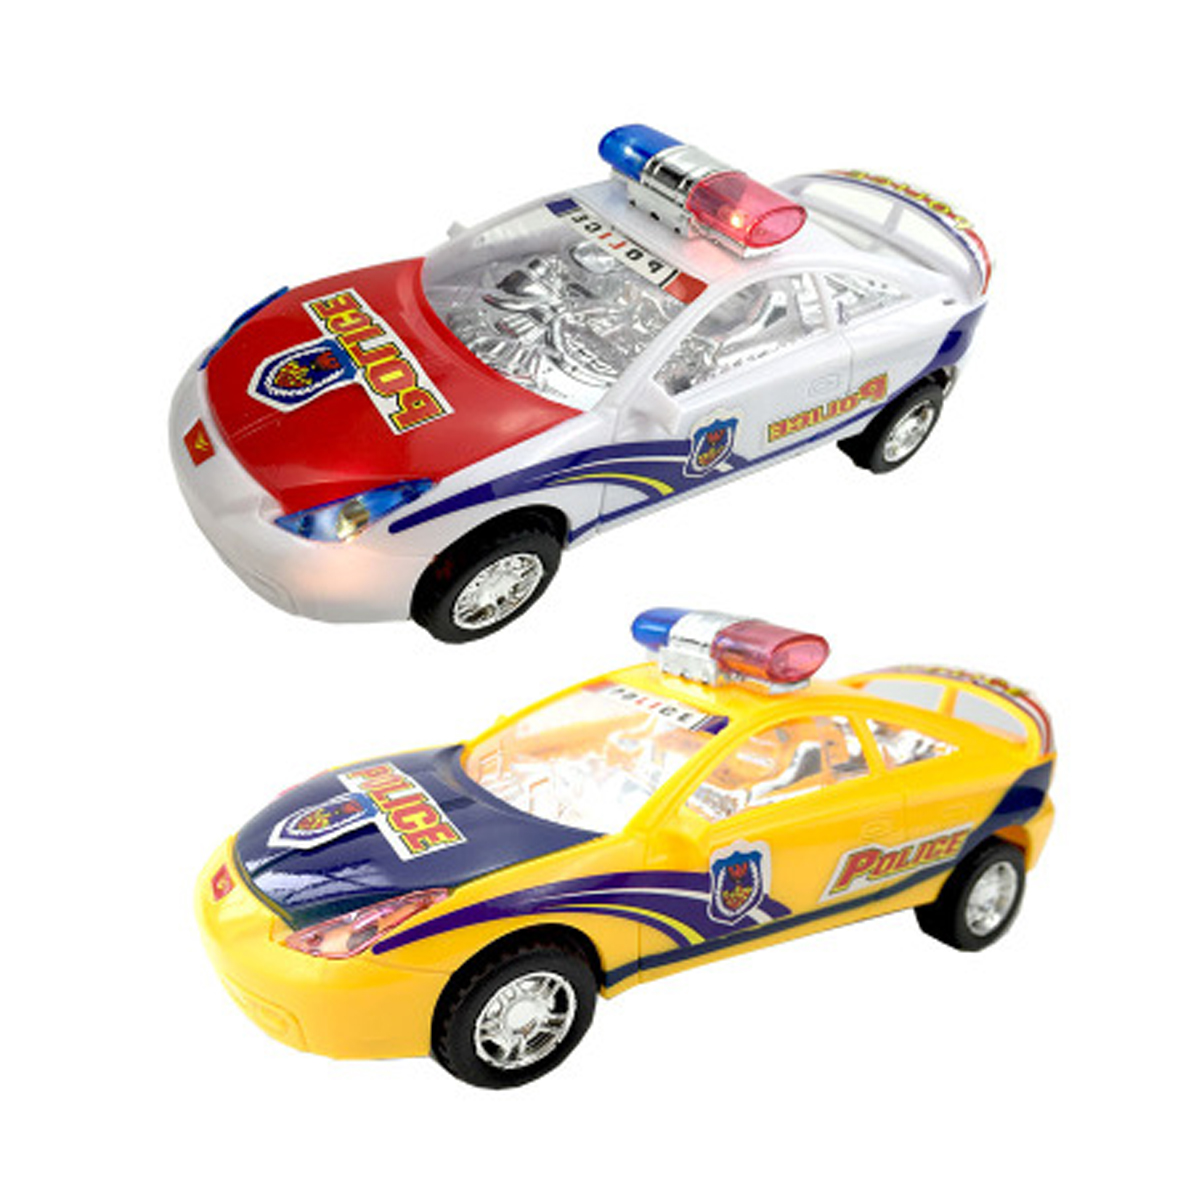 Childrens-Electric-Alloy-Simulation-Po-lice-Car-Diecast-Model-Toy-with-LED-Light-and-Music-1604579-5